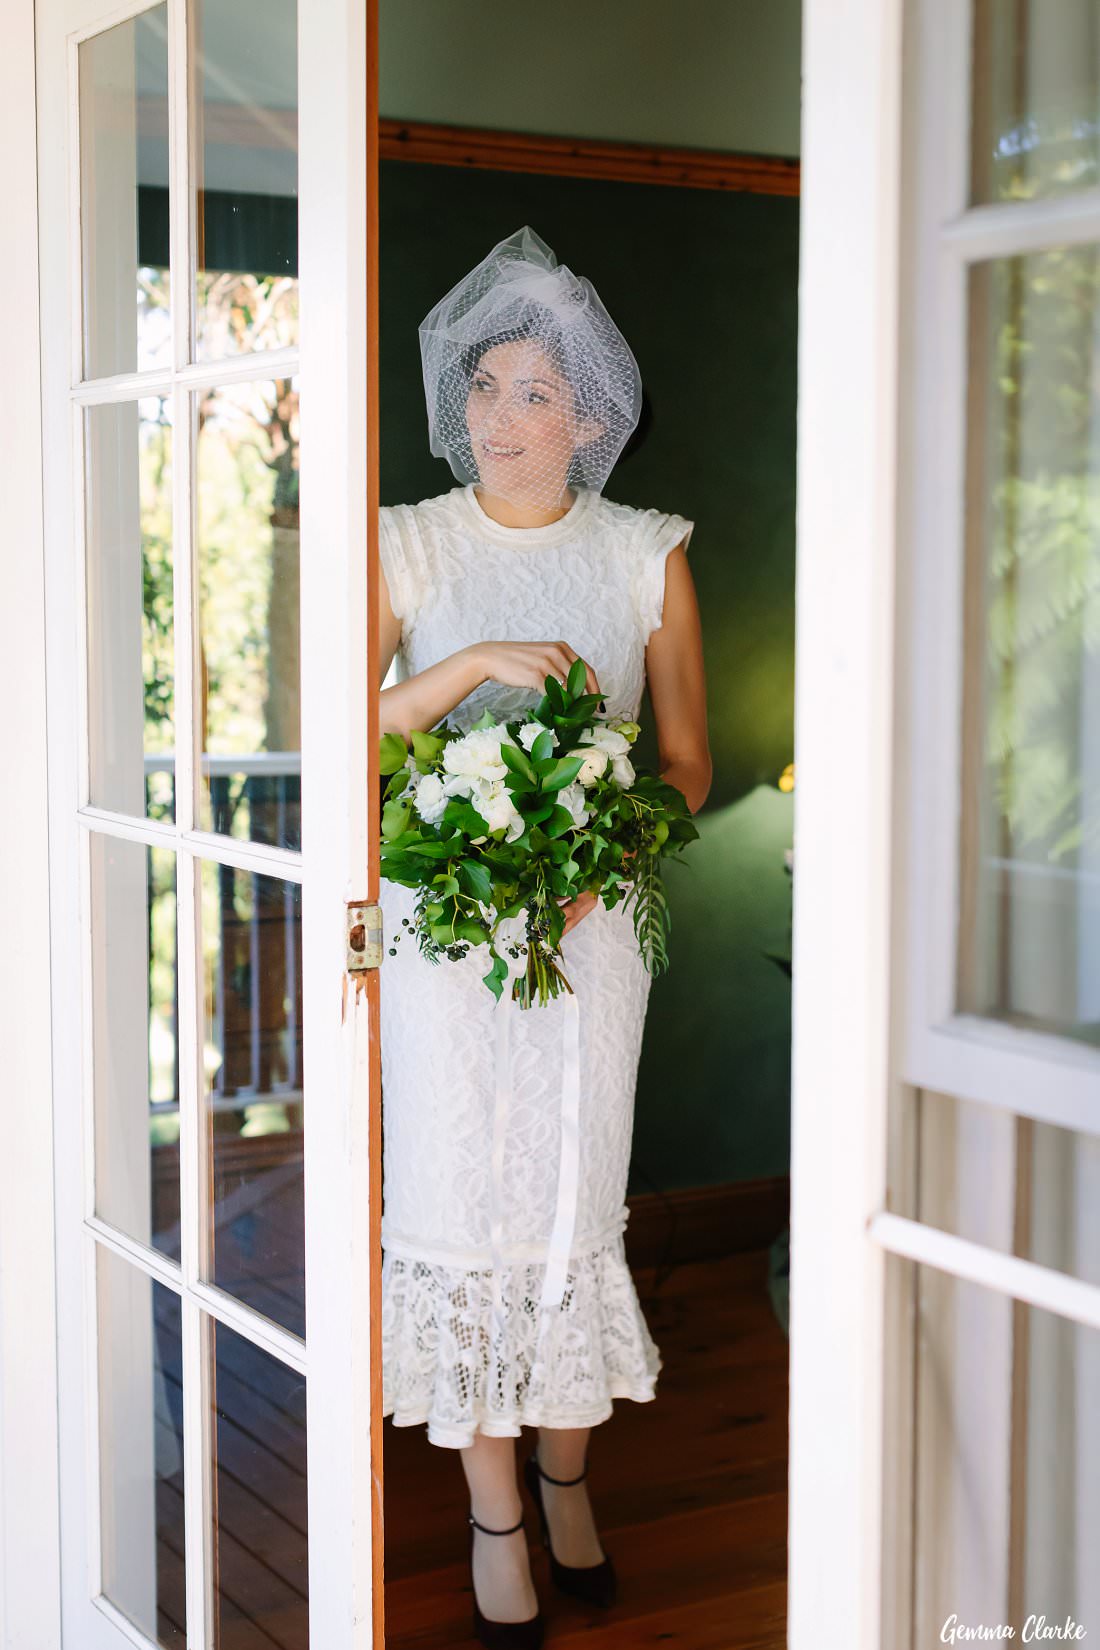 The beautiful bride, Anna Maria waits patiently to walk down the aisle at her Loxley on Bellbird Hill Wedding